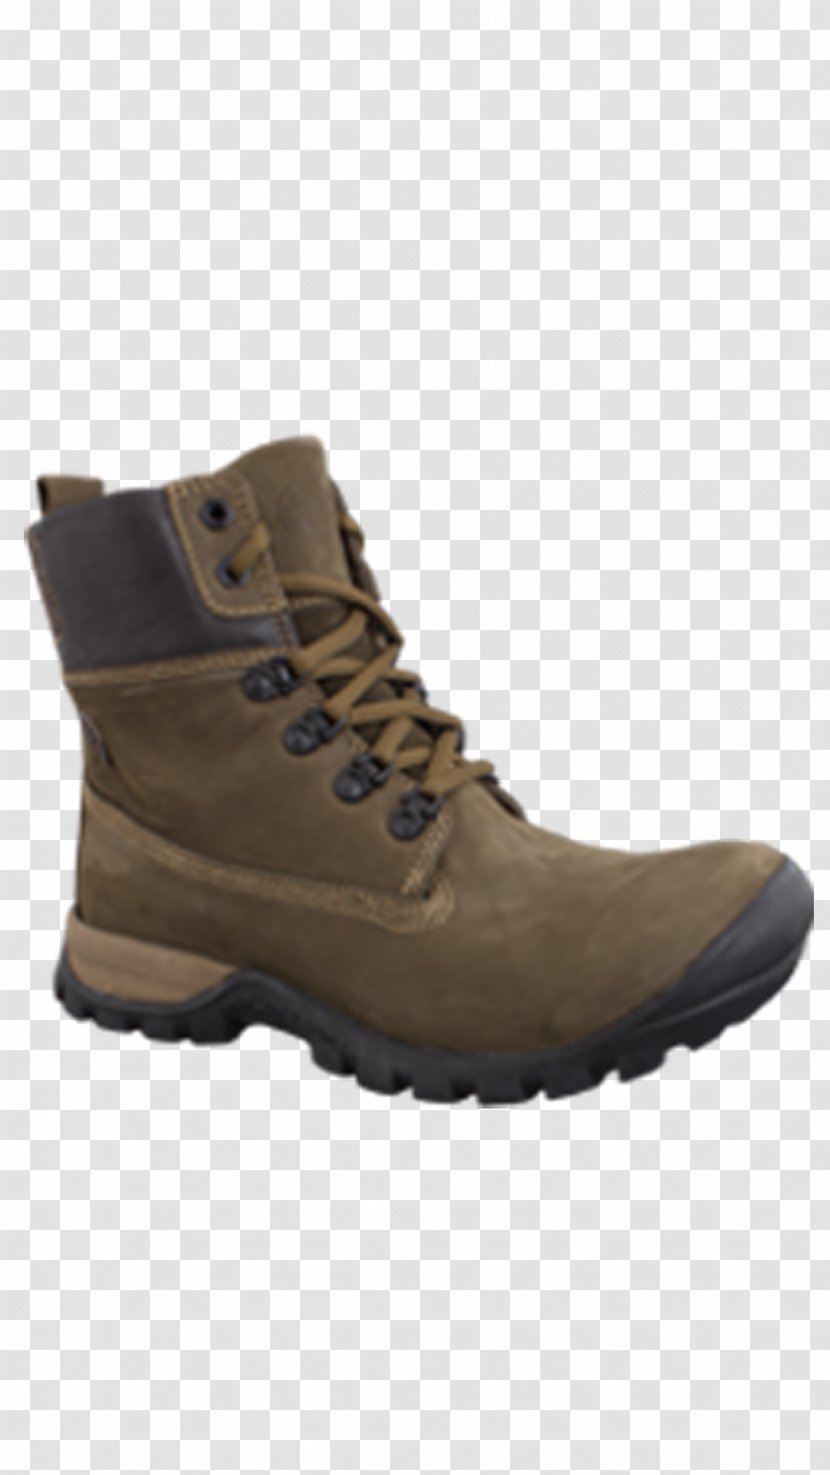 Boot Shoe Footwear Sneakers Olive - Walking - Casual Shoes Transparent PNG